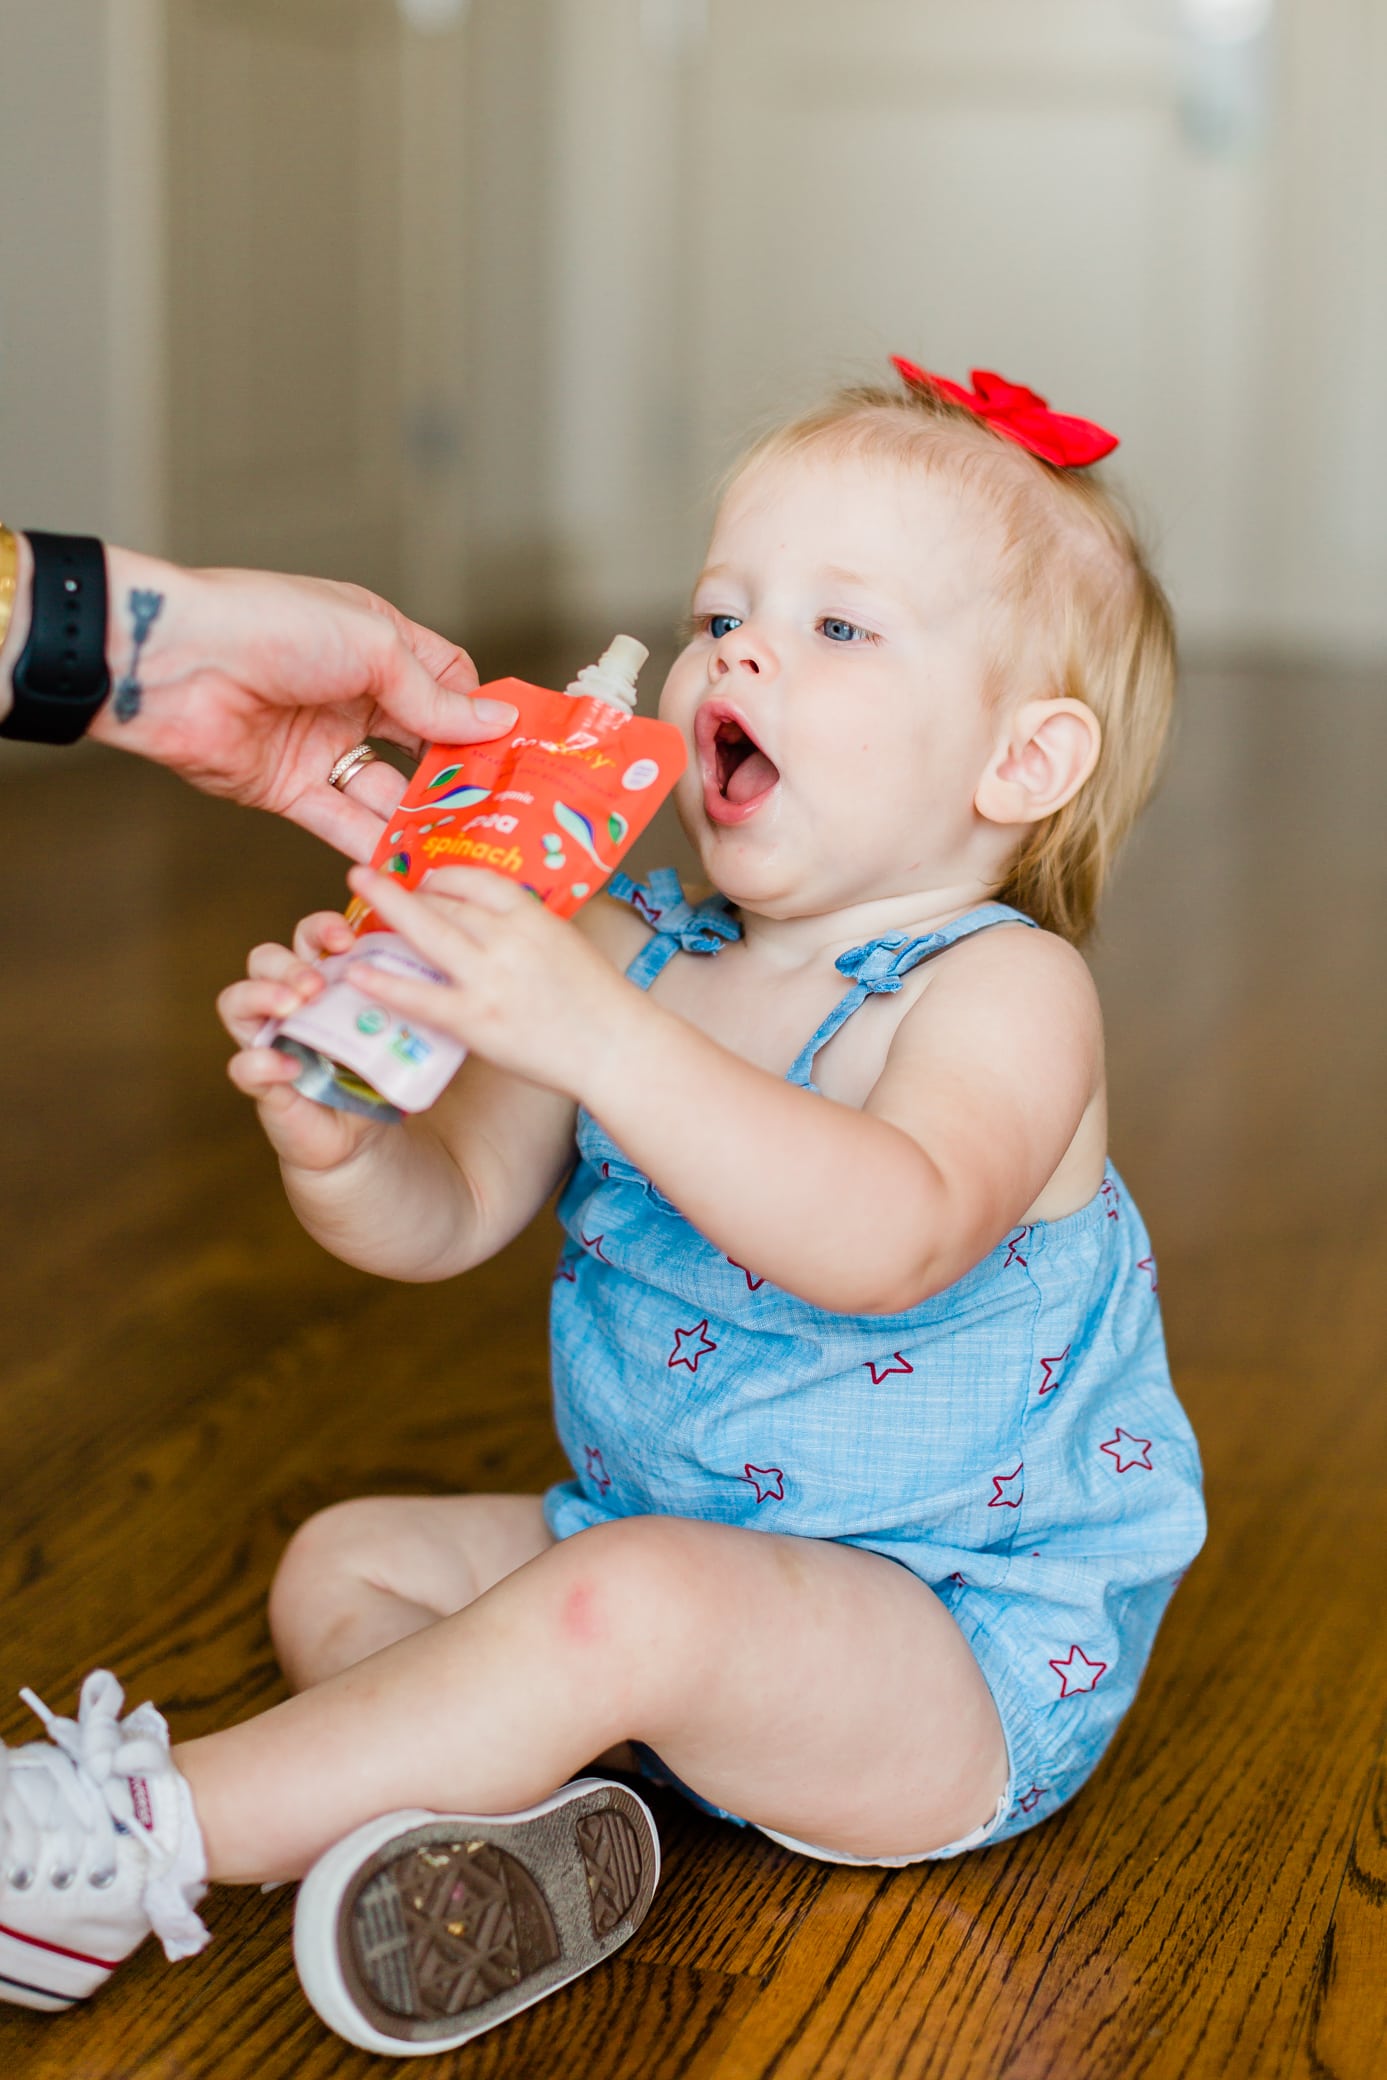 Young toddler girl reaching for a pouch ready to eat.